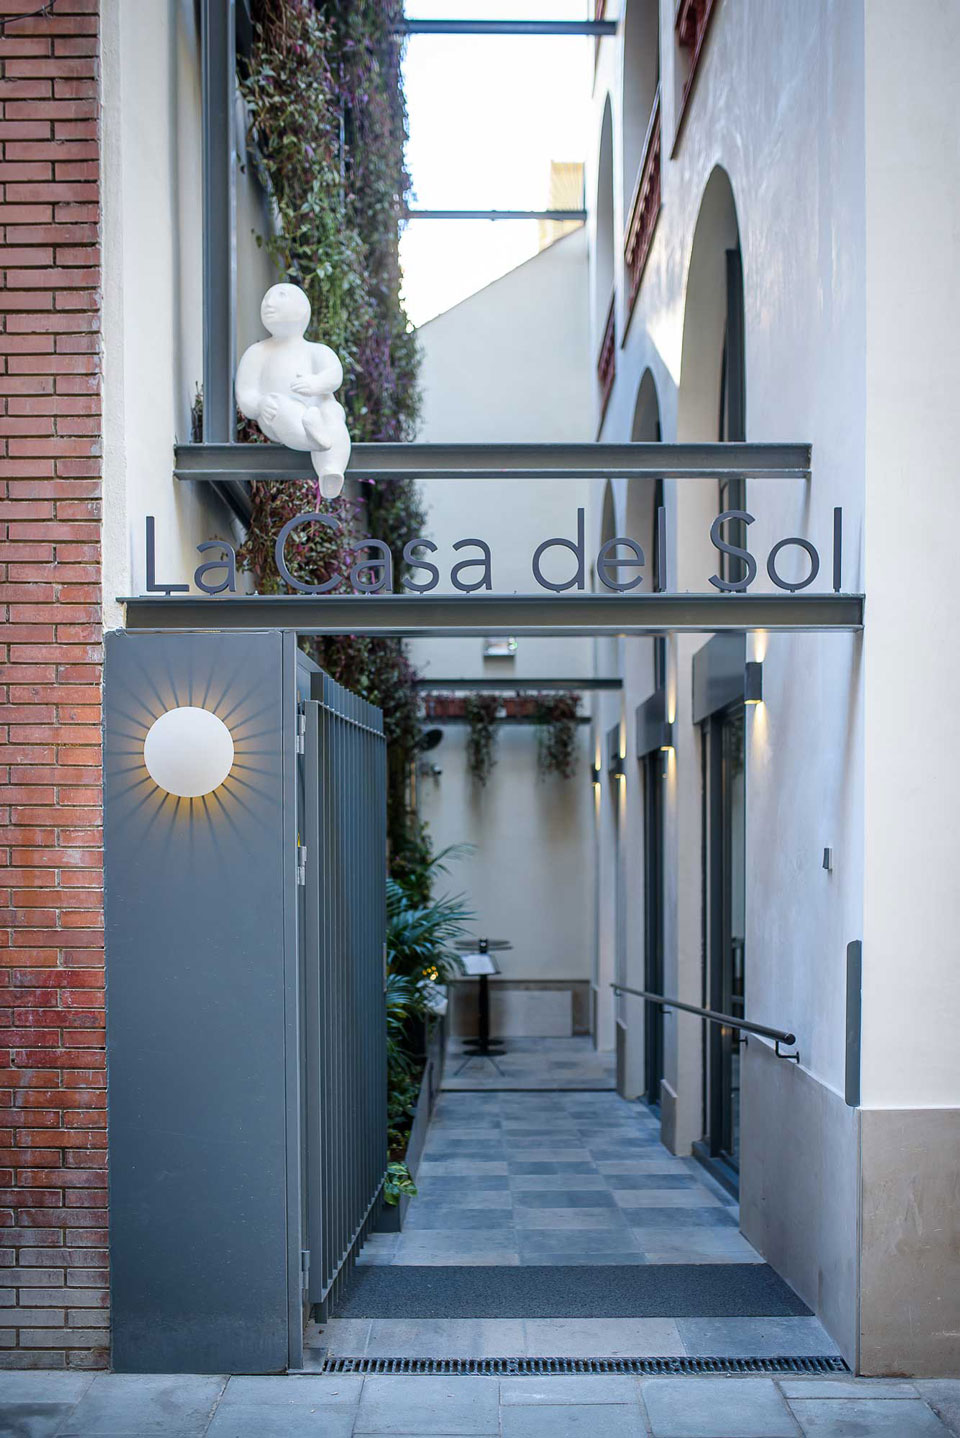 Vibia The Edit - Designers Select Vibia for a Boutique Barcelona Hotel - Meridiano